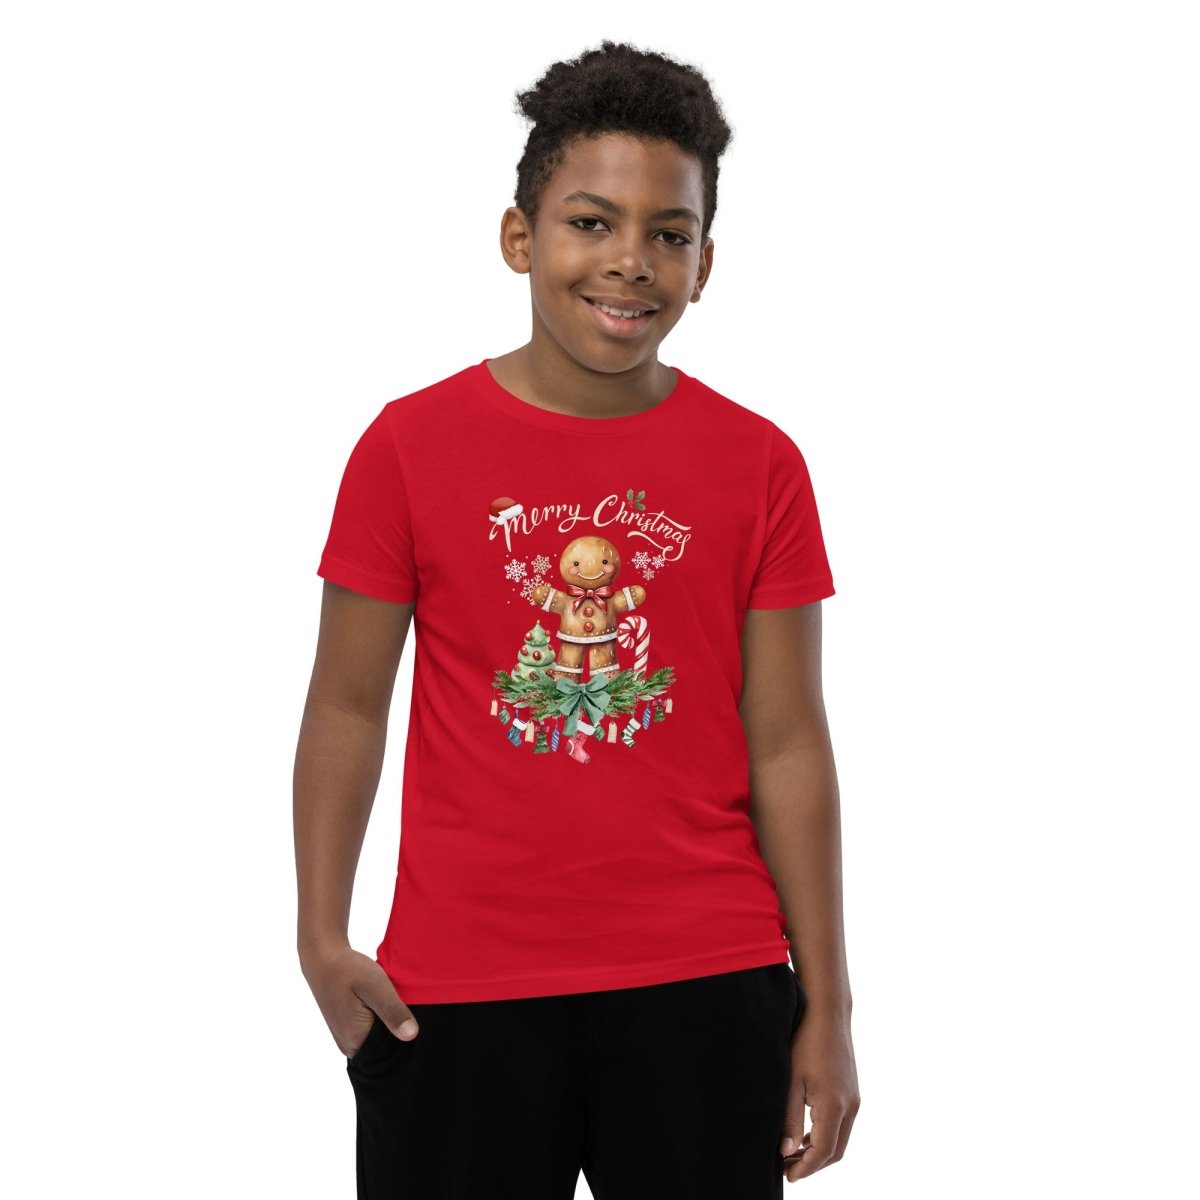 Christmas Gingerbread Man T-Shirt - High Quality Festive Family Teenager T-Shirt, Gift for Candy Lovers, Christmas Candy, Youth Xmas Tee - Everything Pixel